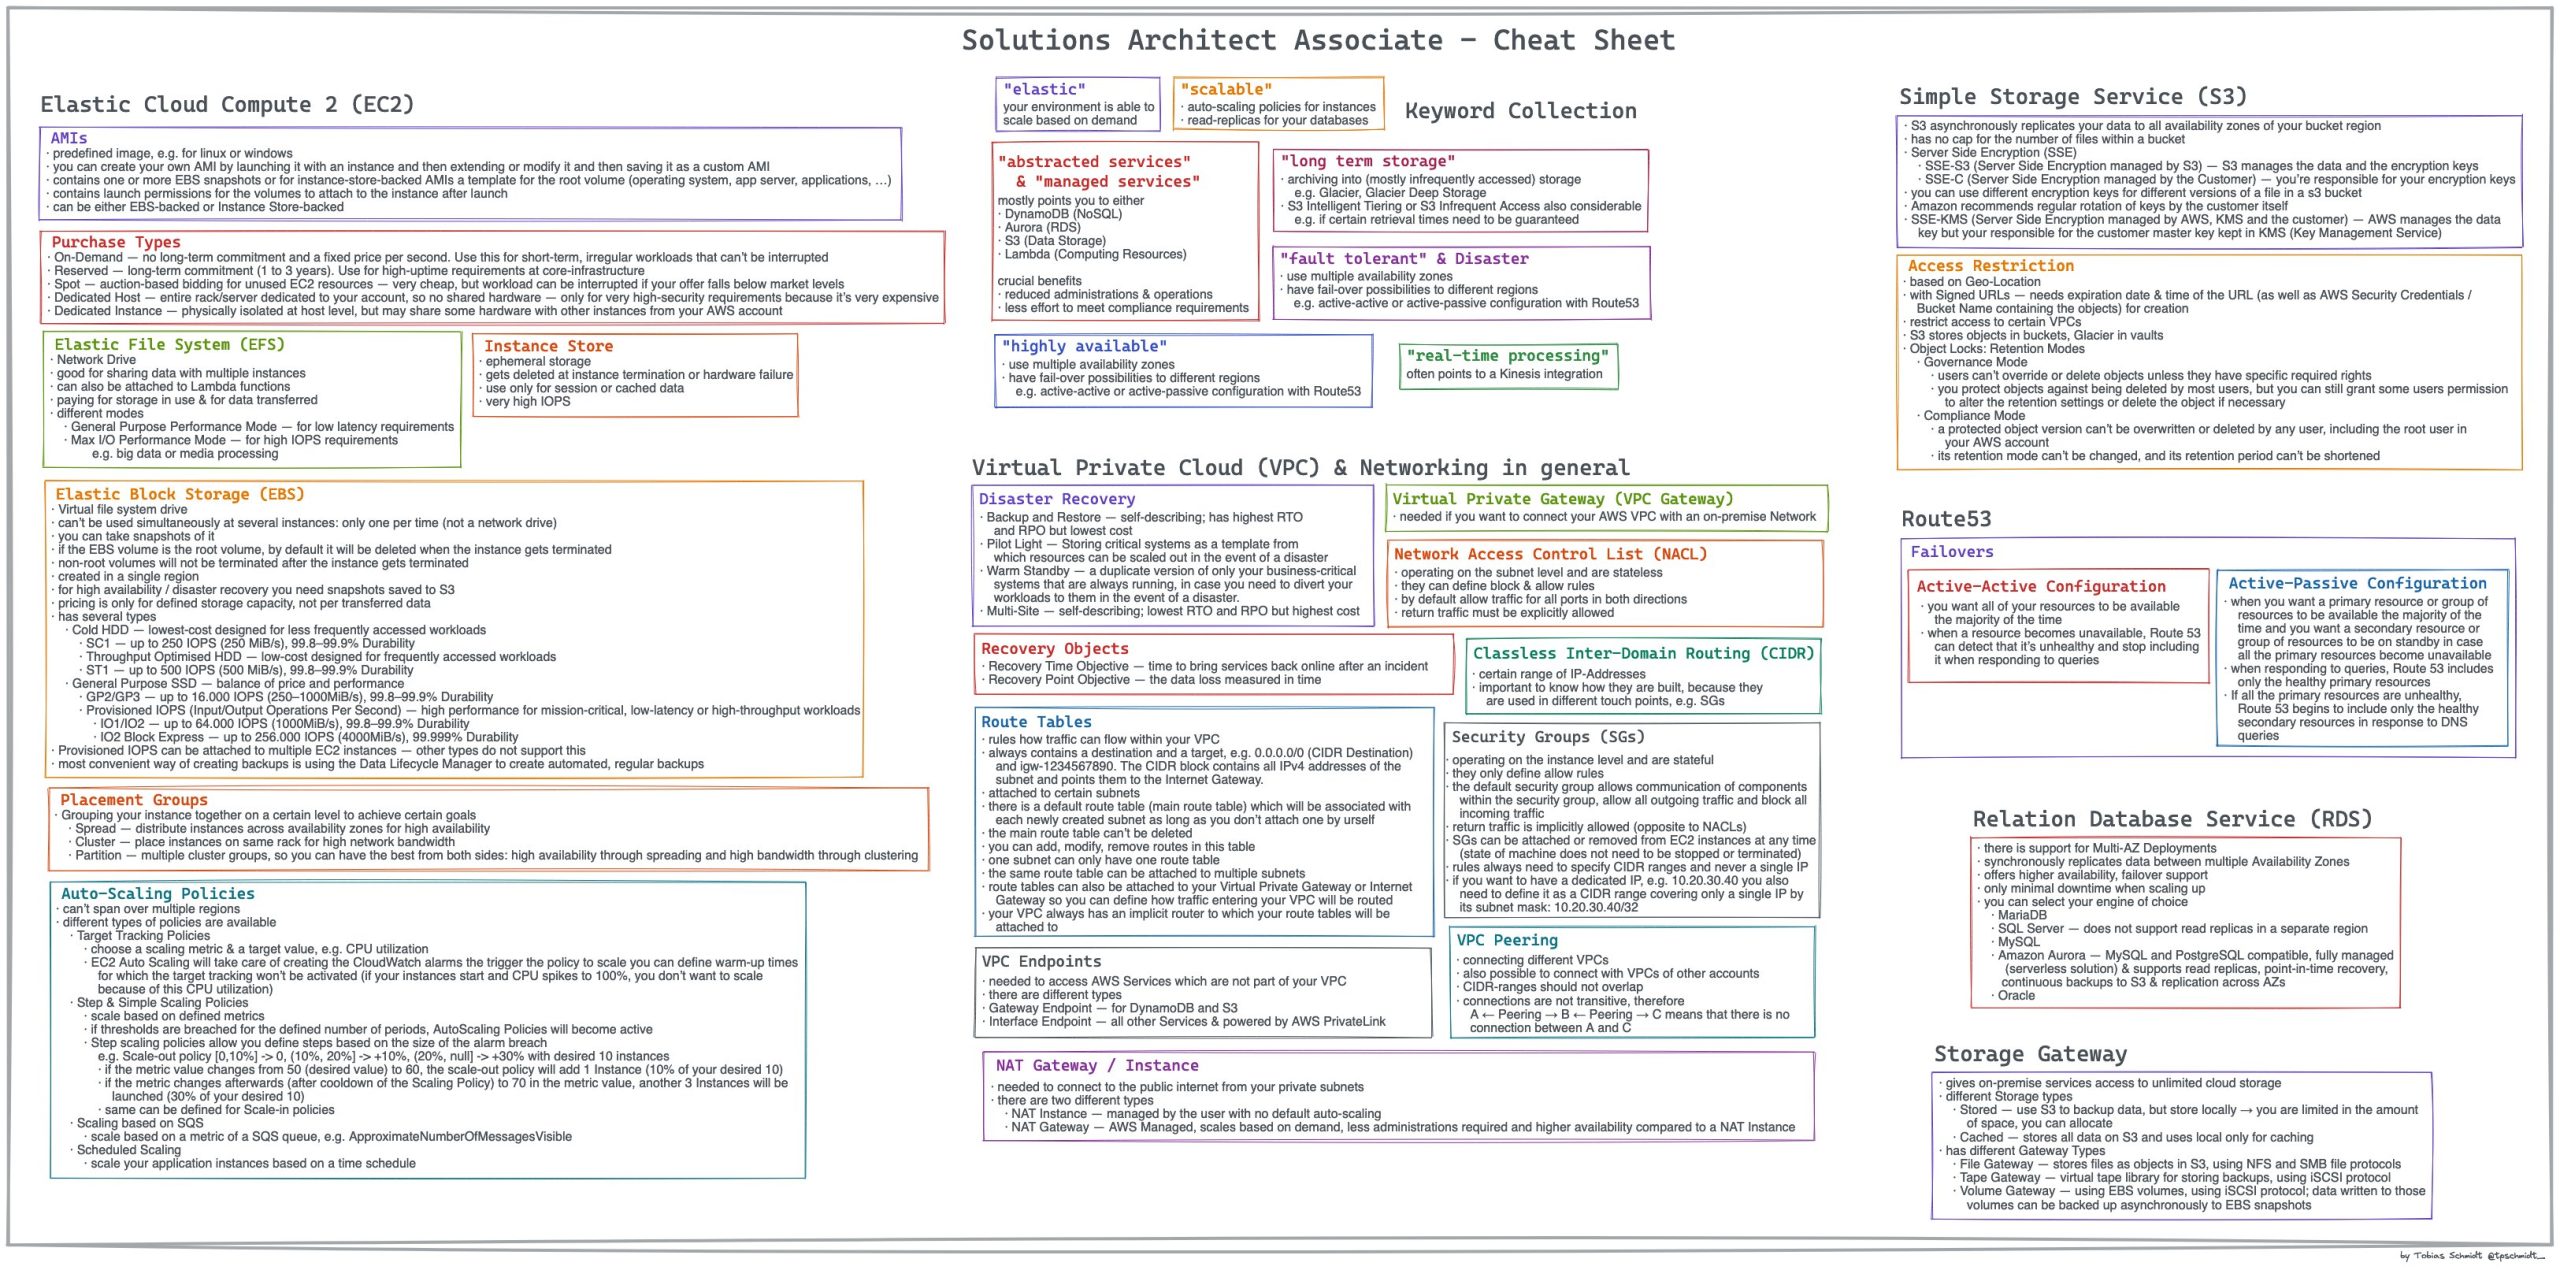 Cheat sheet for the AWS Solutions Architect Associate certification